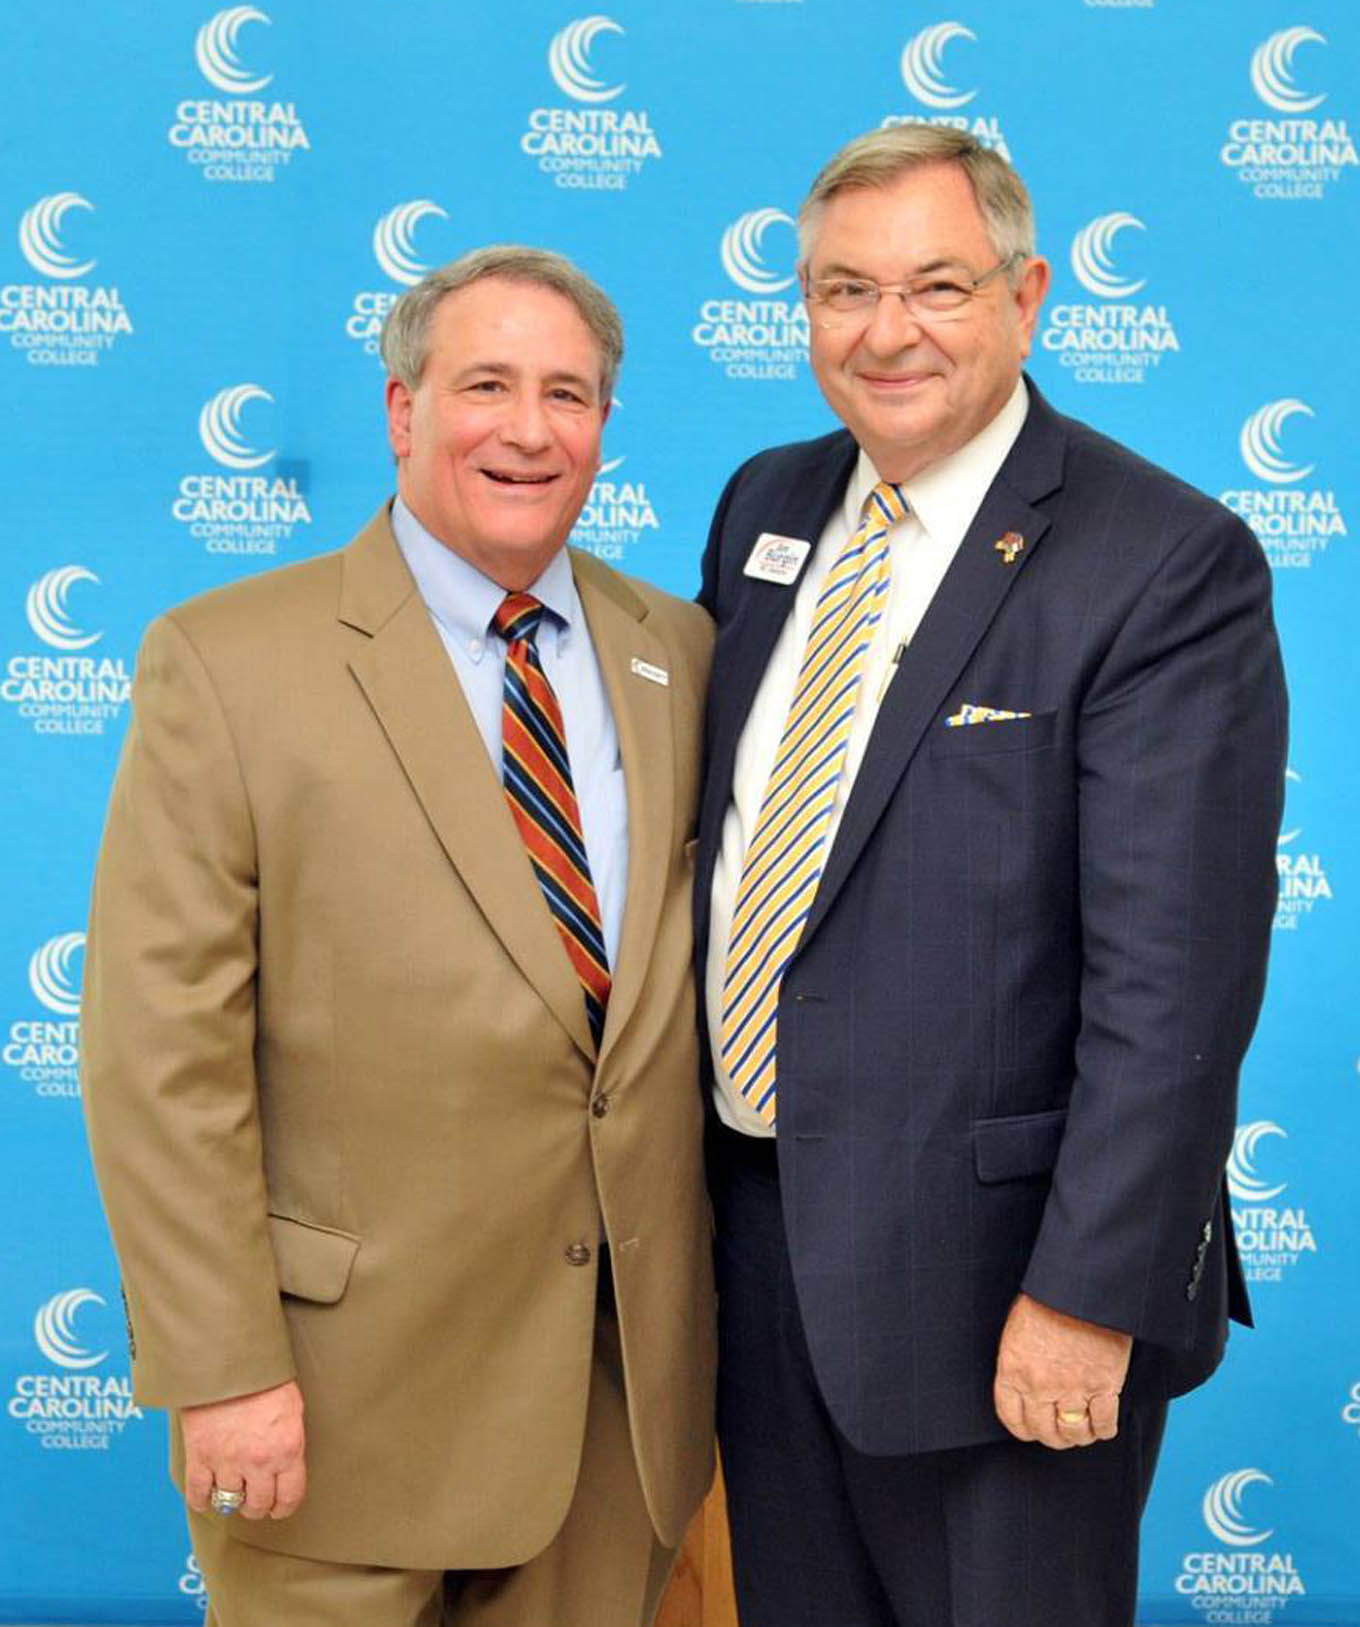 Read the full story, Philpott, Burgin reappointed to lead CCCC Trustees